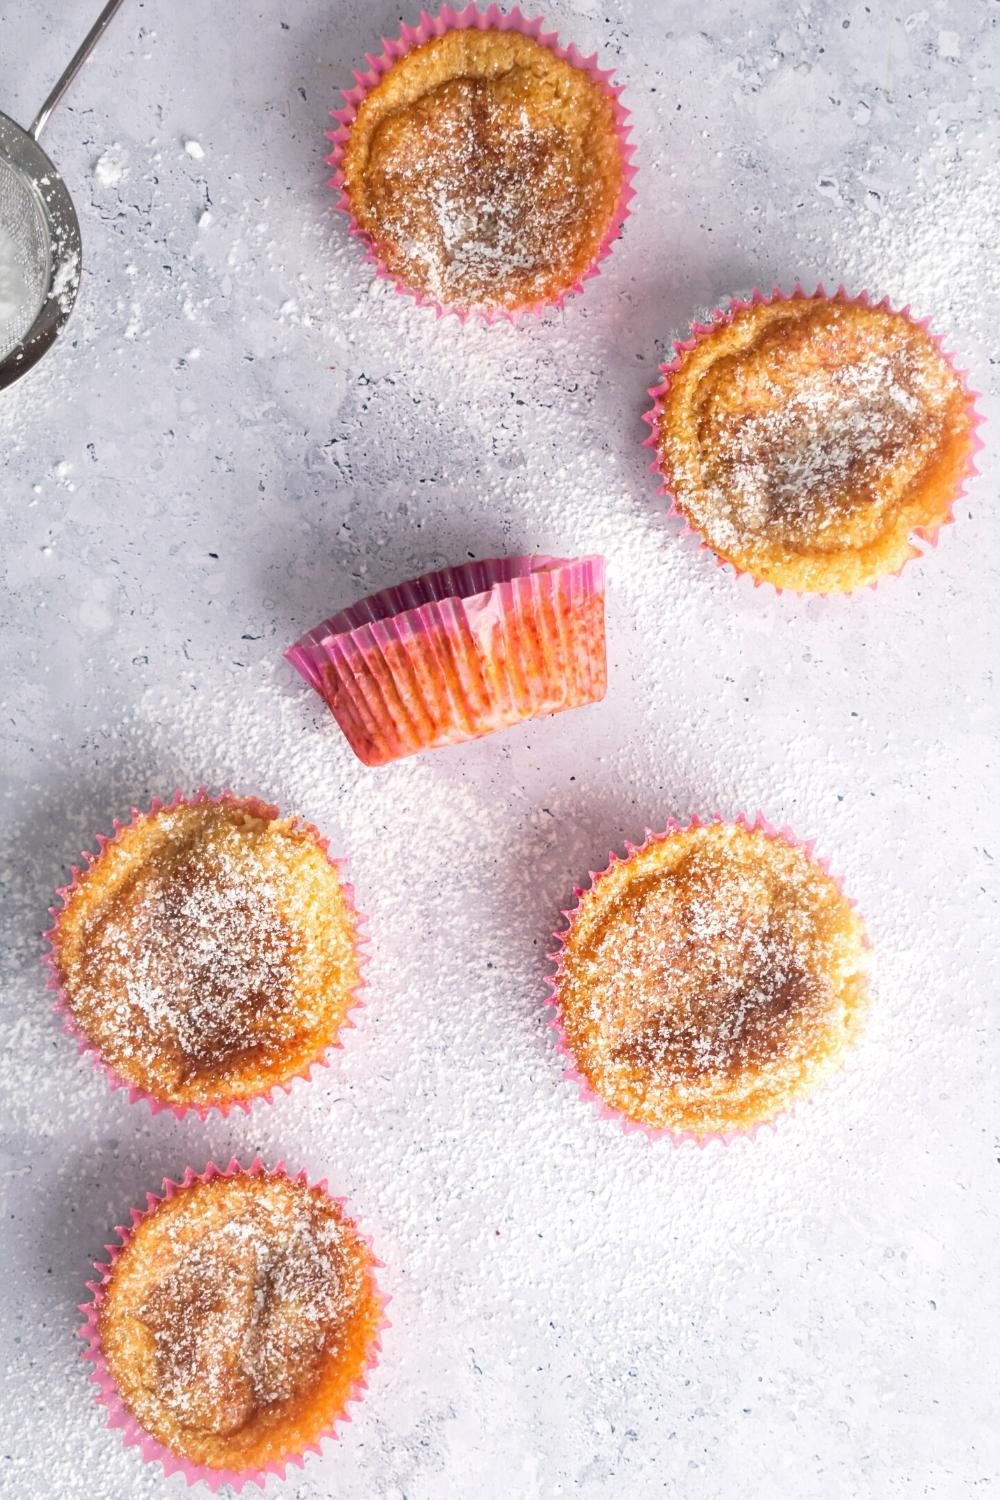 Six mochi muffins scattered on a grey counter that is covered in powdered sugar.